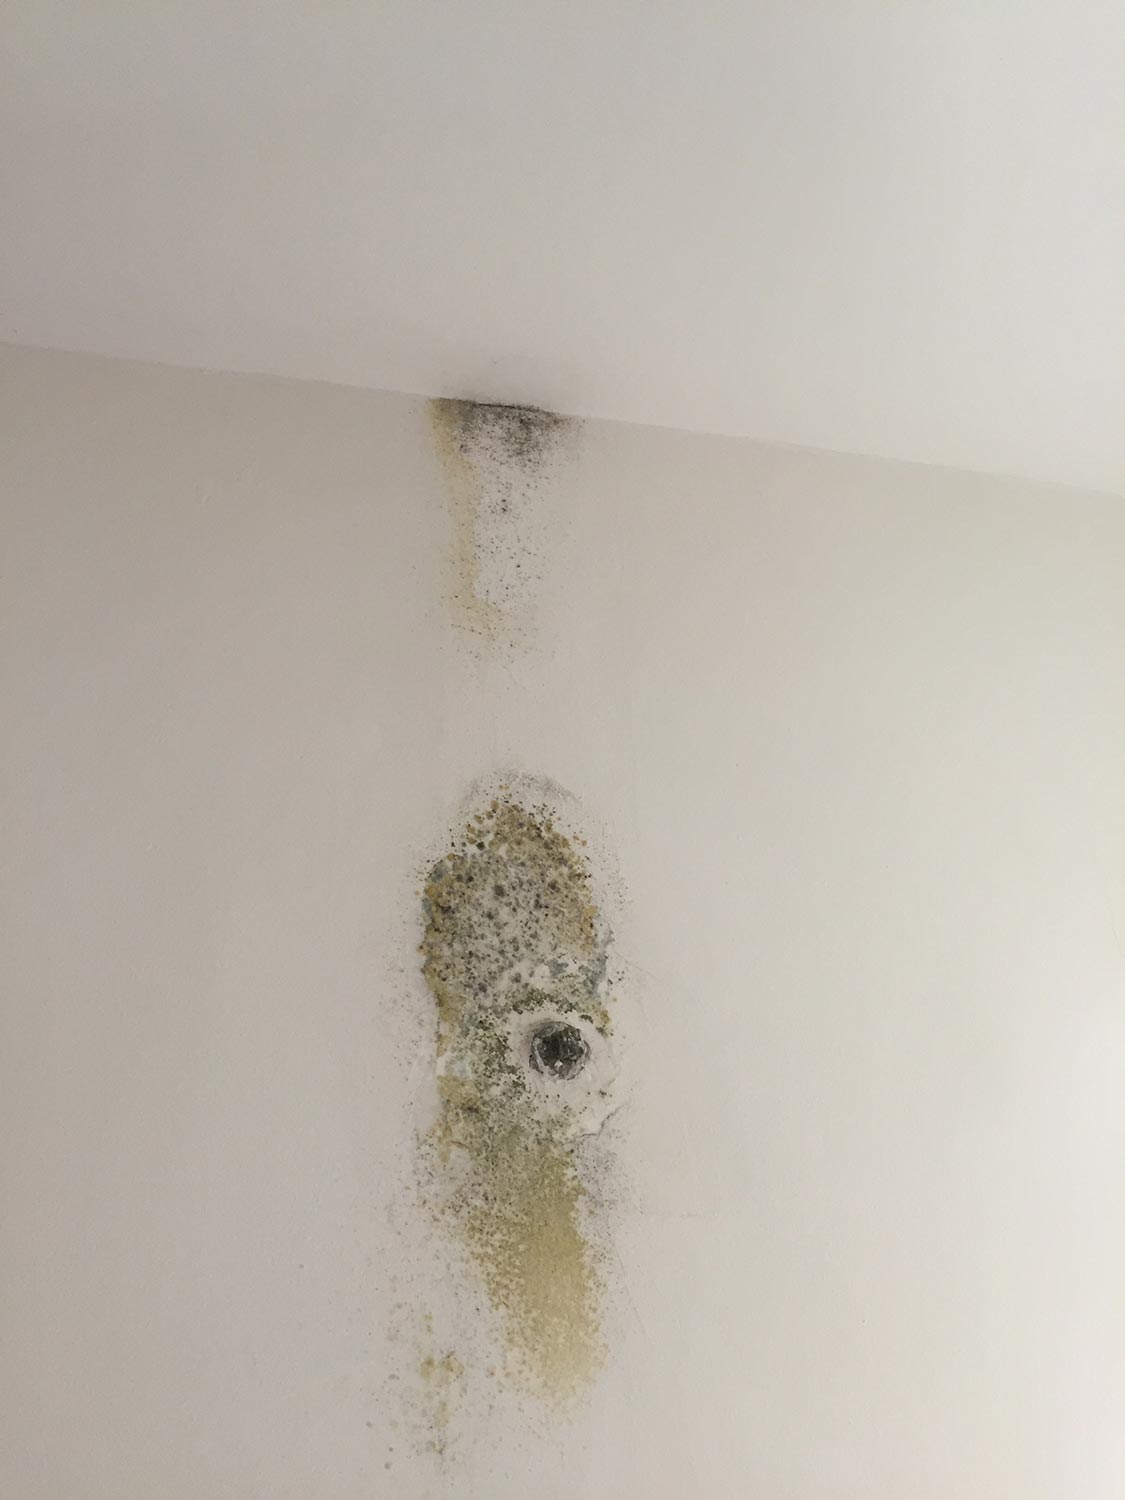 Mold commonly grows out of sight behind walls in the wall cavities